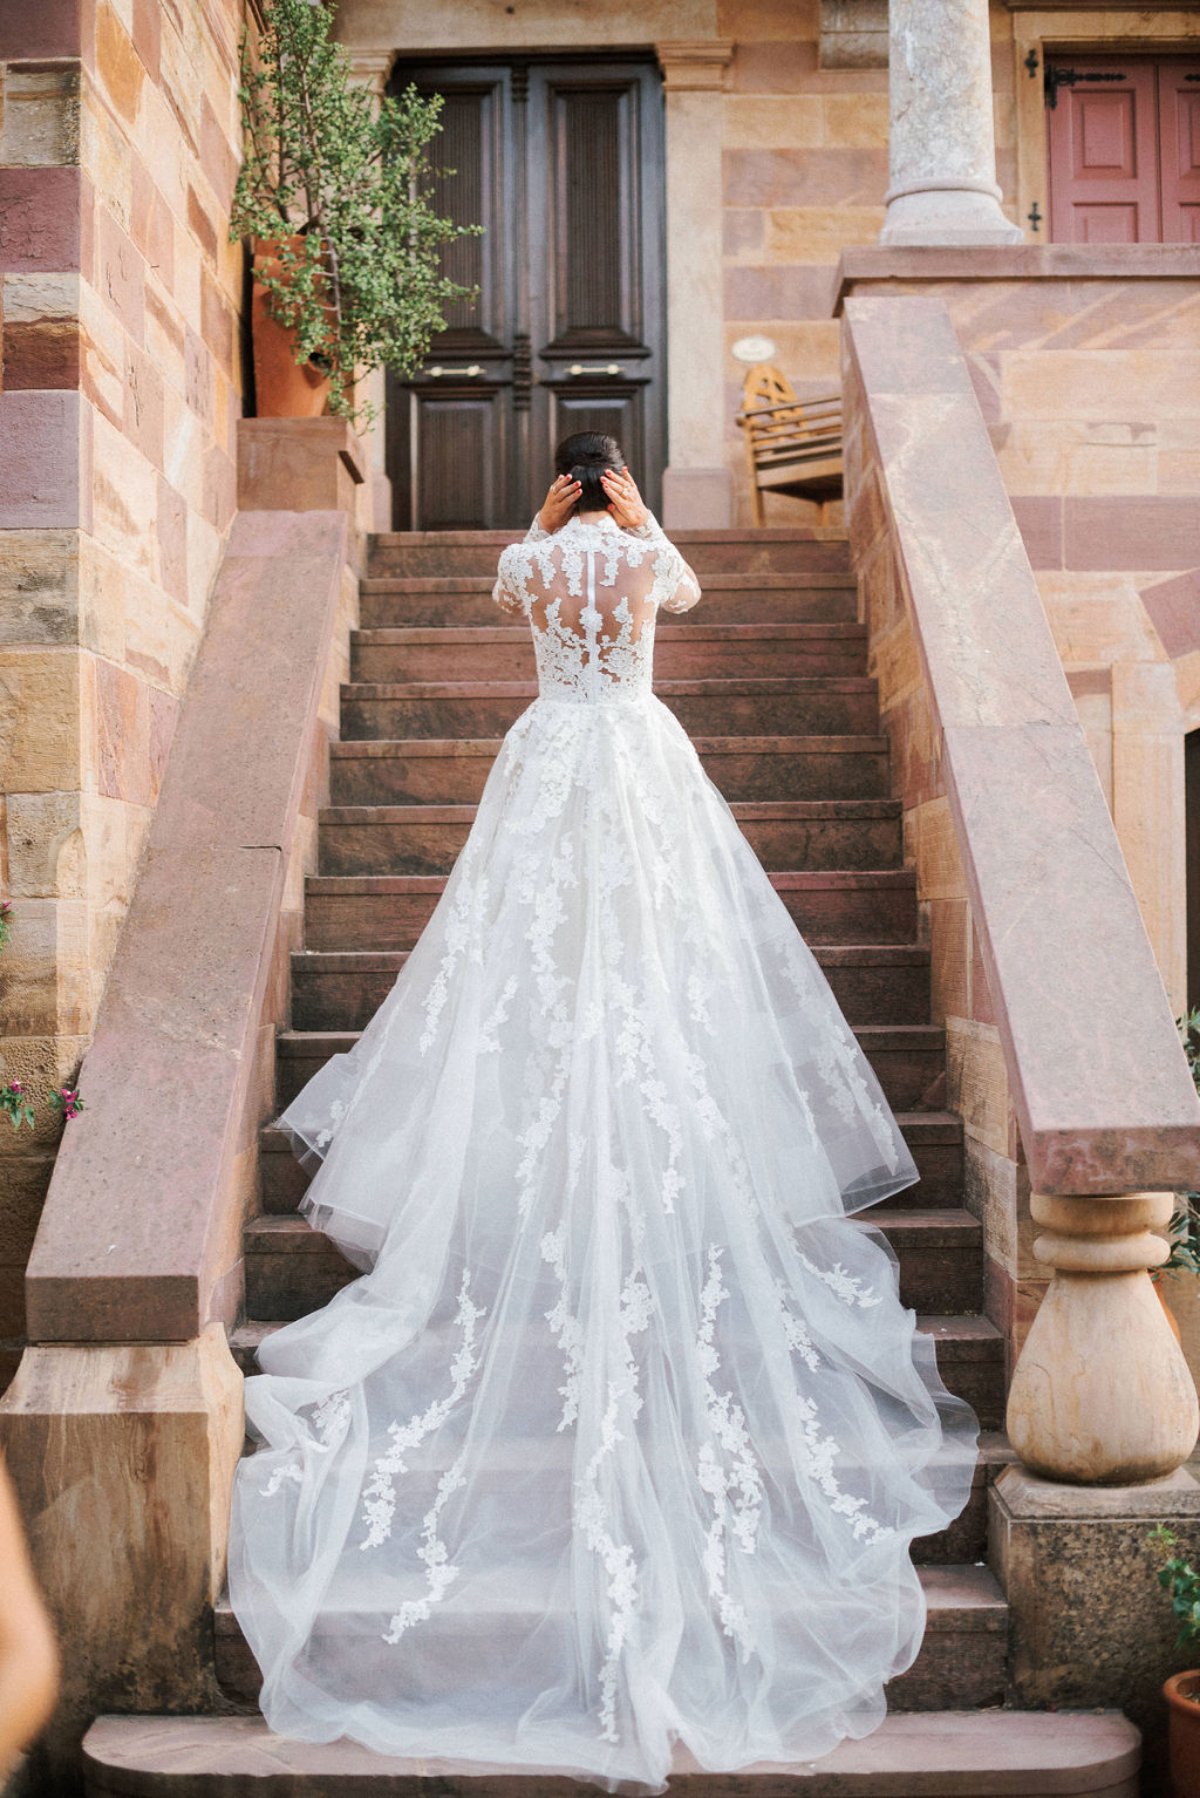 luxurious wedding dress with lace - Destination Wedding in Greece - wedding photographer in Chios